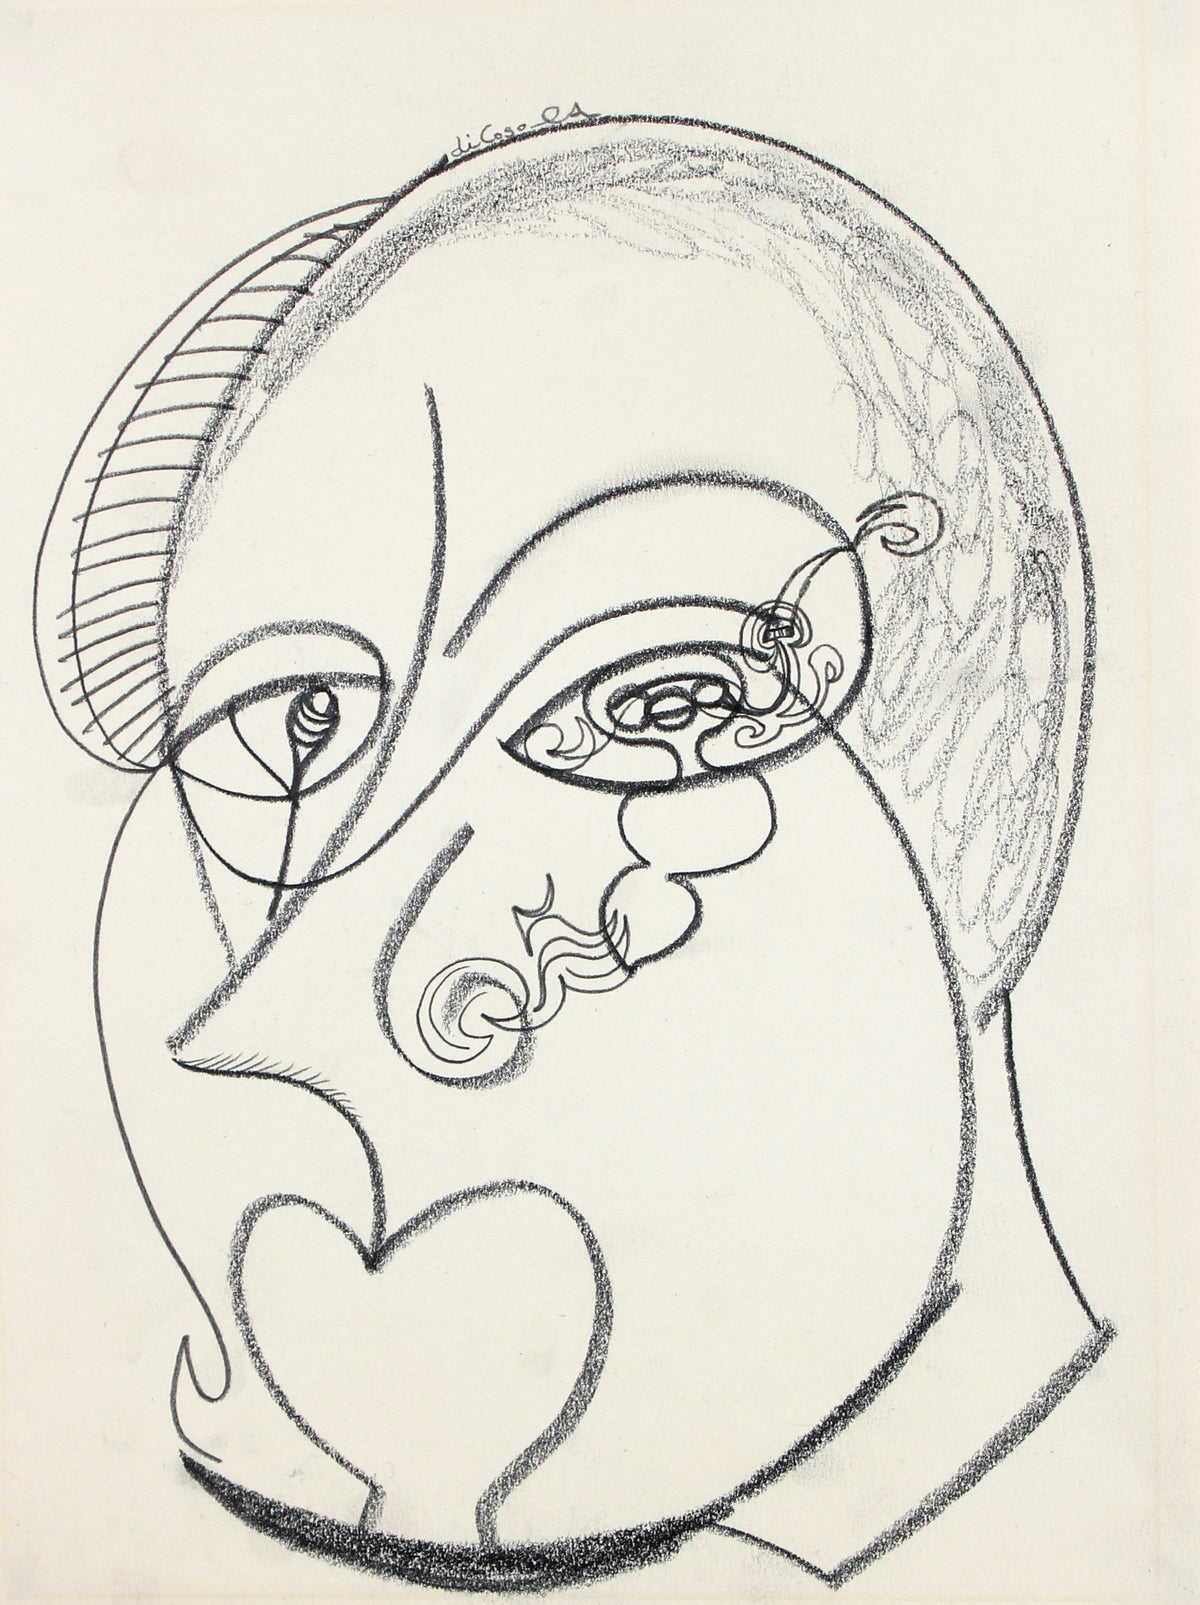 Surrealist Abstracted Face &lt;br&gt; Late 20th Century Graphite &lt;br&gt;&lt;br&gt;#98848